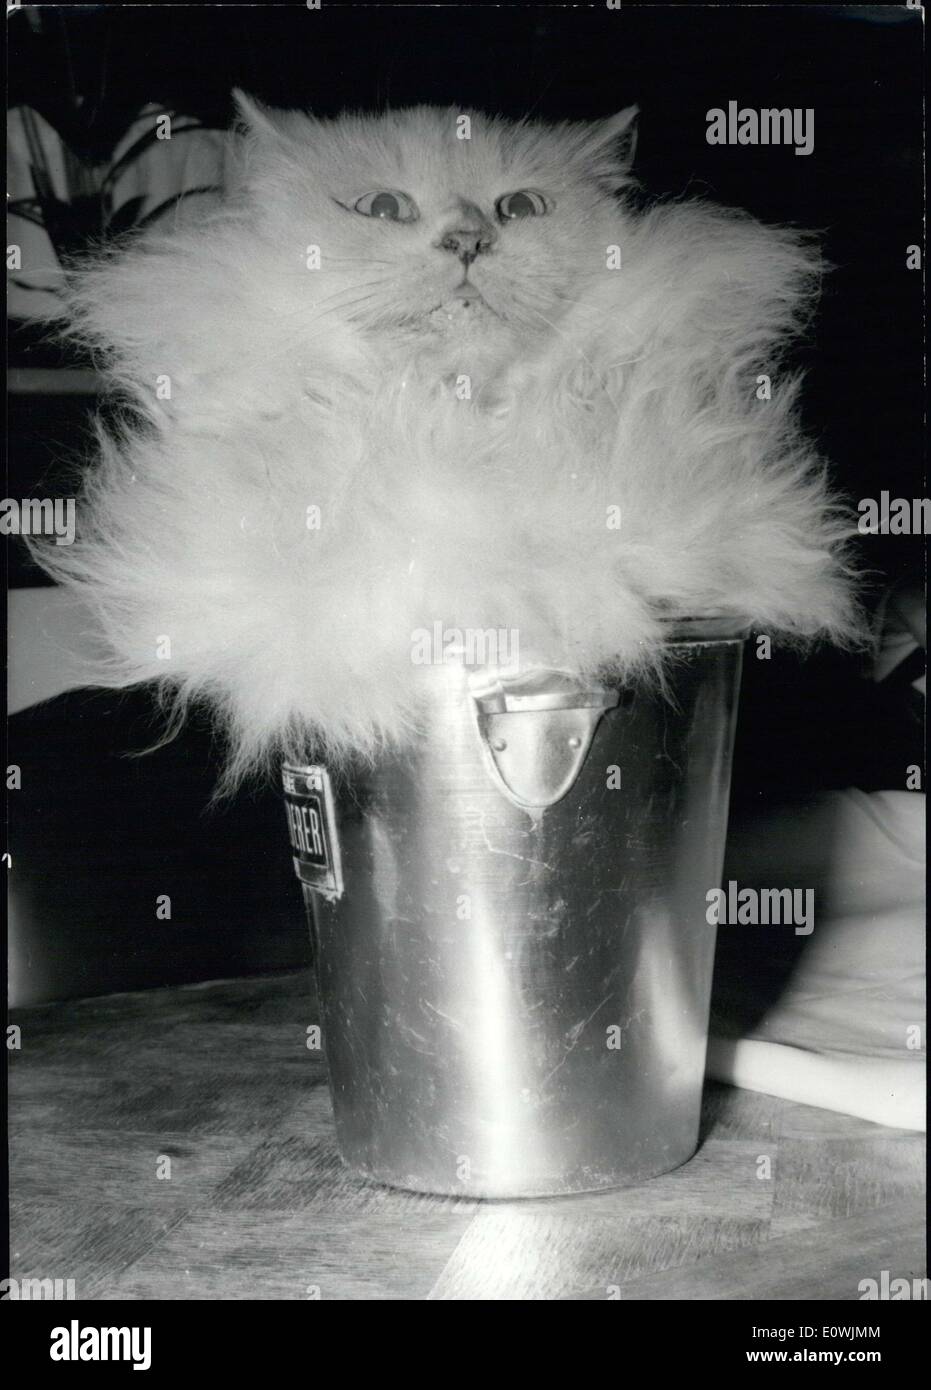 Mar. 10, 1963 - The cat is being presented to the press to promote the International Feline Exposition that will be held in Paris in the Wagram Room on March 15,16, and 17. Stock Photo